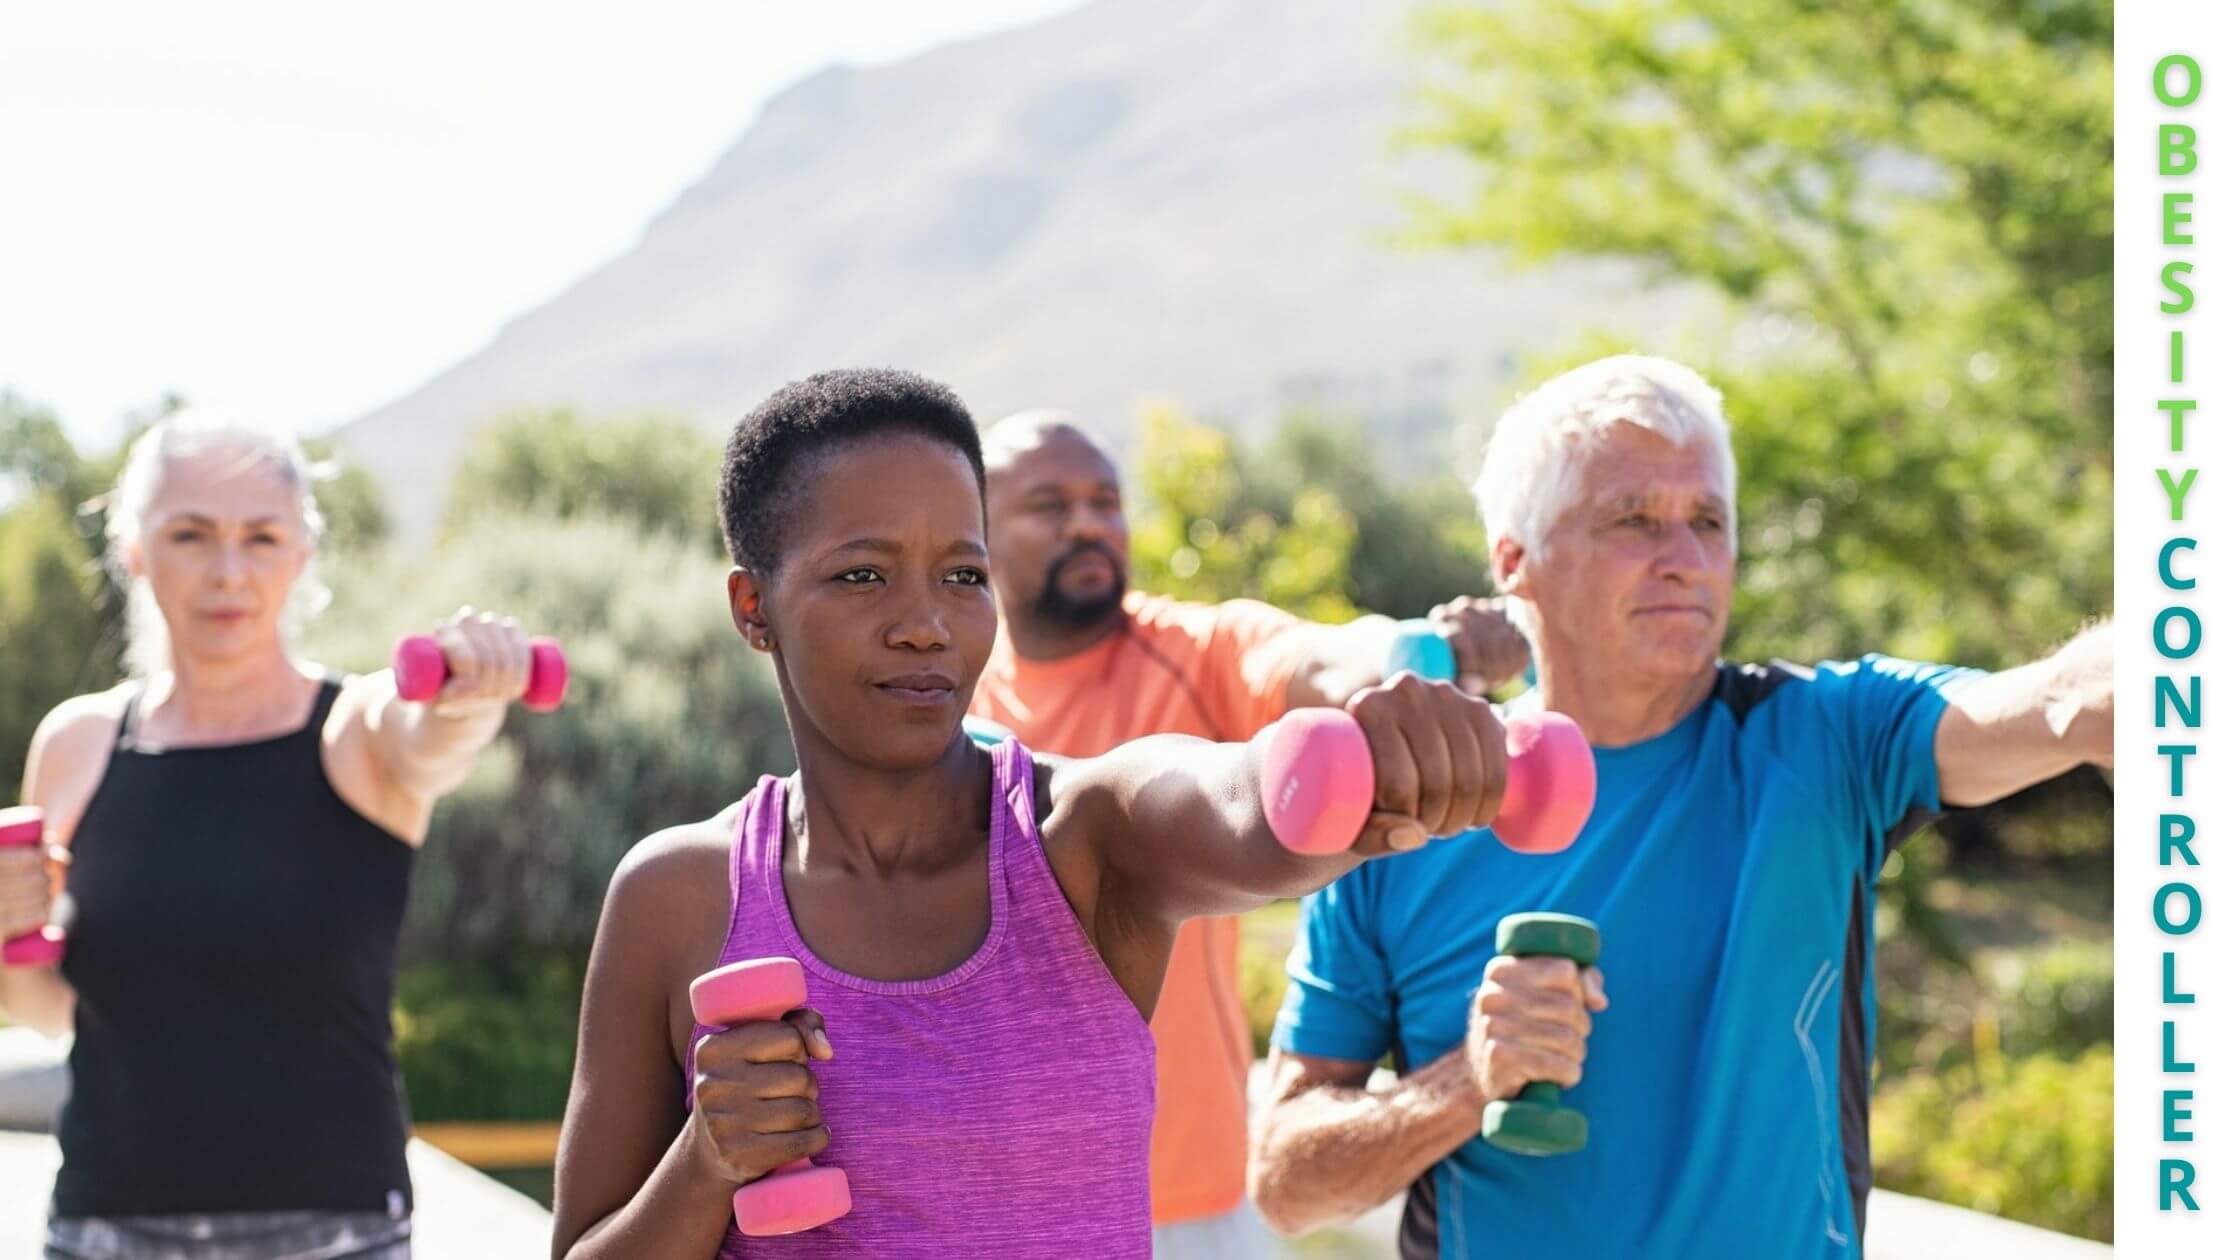 Middle Age Requires More Exercises For Healthy Aging